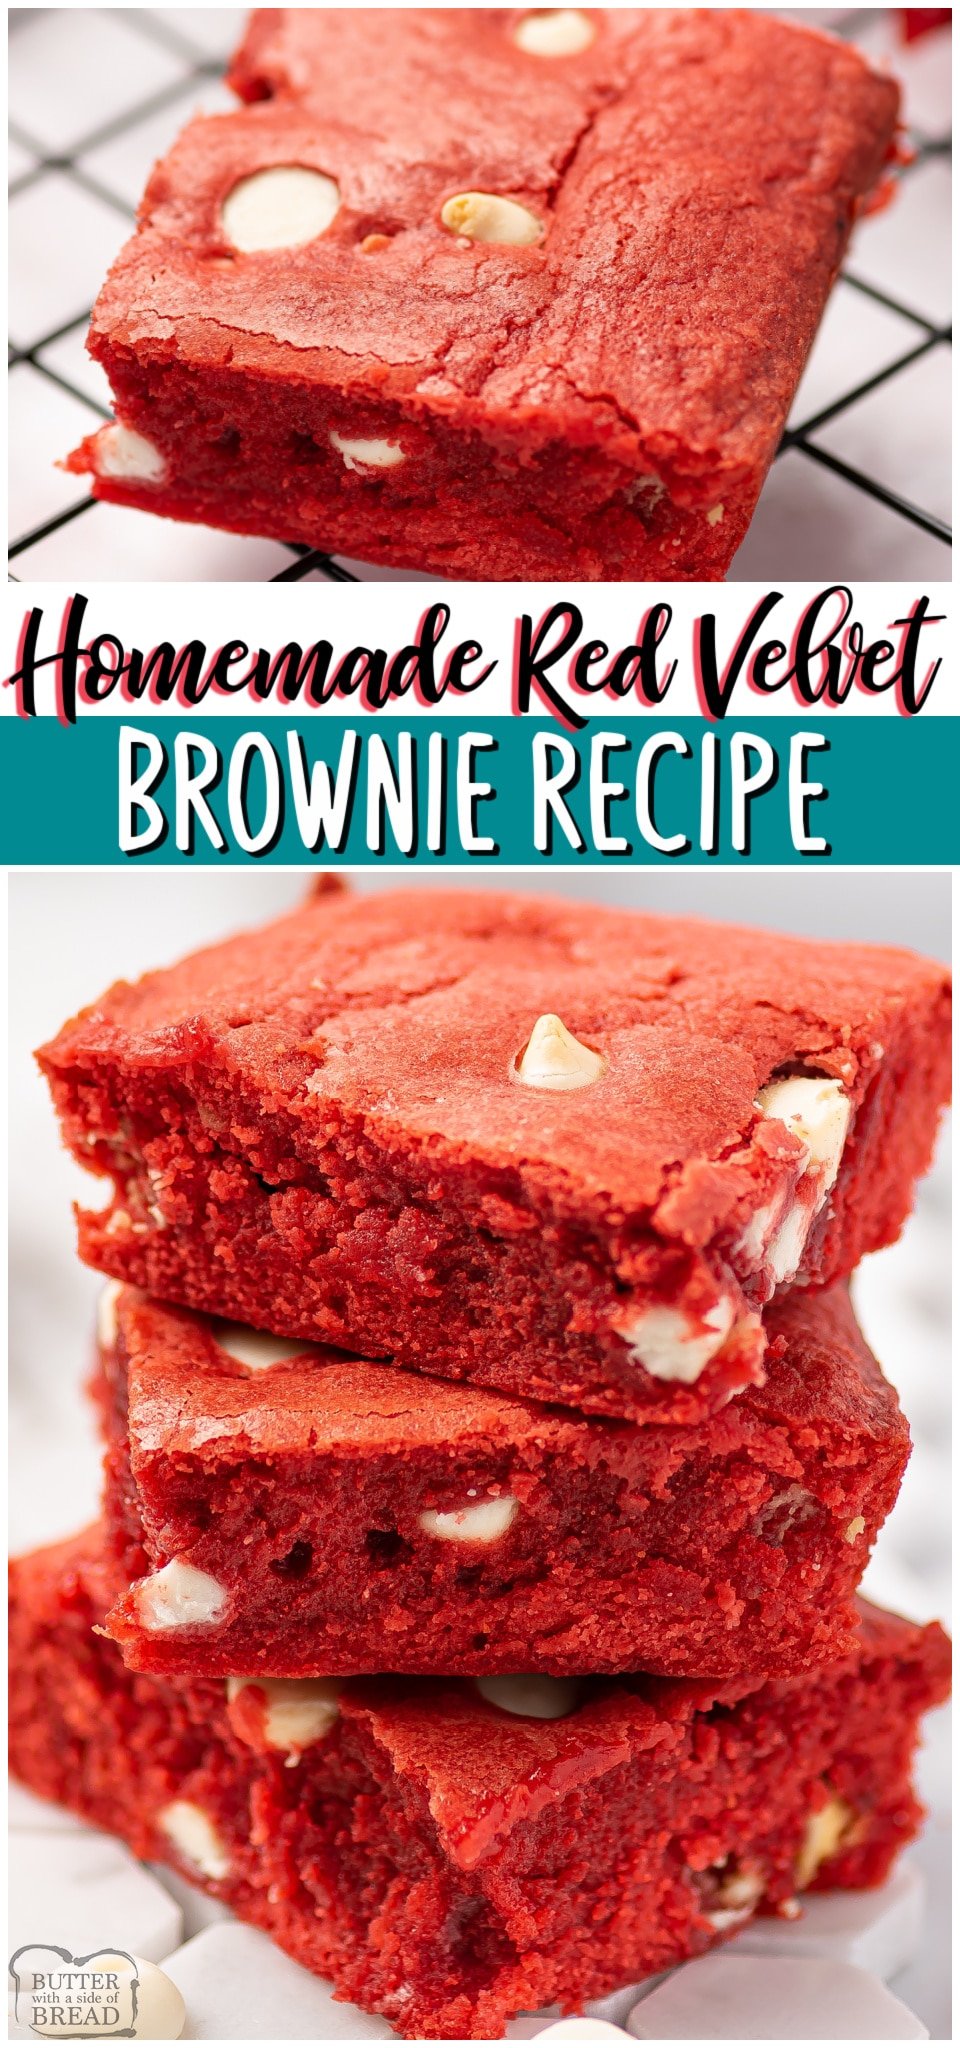 Red velvet brownies are a rich, chocolaty brownie with red velvet color, scattered with chocolate chips. Homemade Red Velvet Brownies perfect for Valentine's day! #redvelvet #brownies #dessert #baking #Valentines #easyrecipe from BUTTER WITH A SIDE OF BREAD